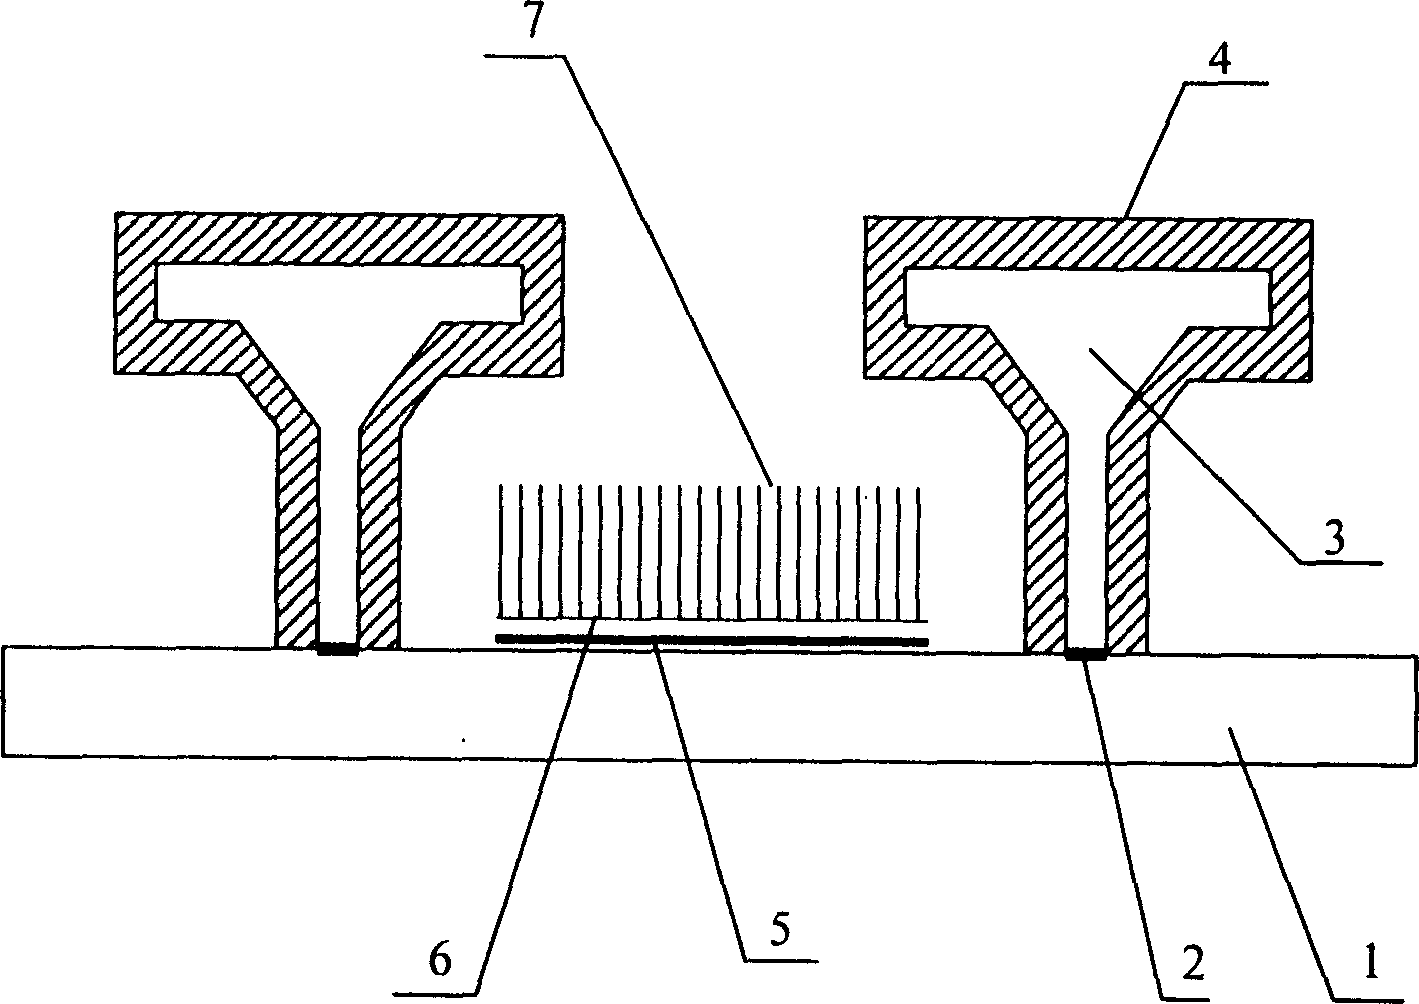 Pland display having umbrella-shaped grid array structure and its manufacturing technology